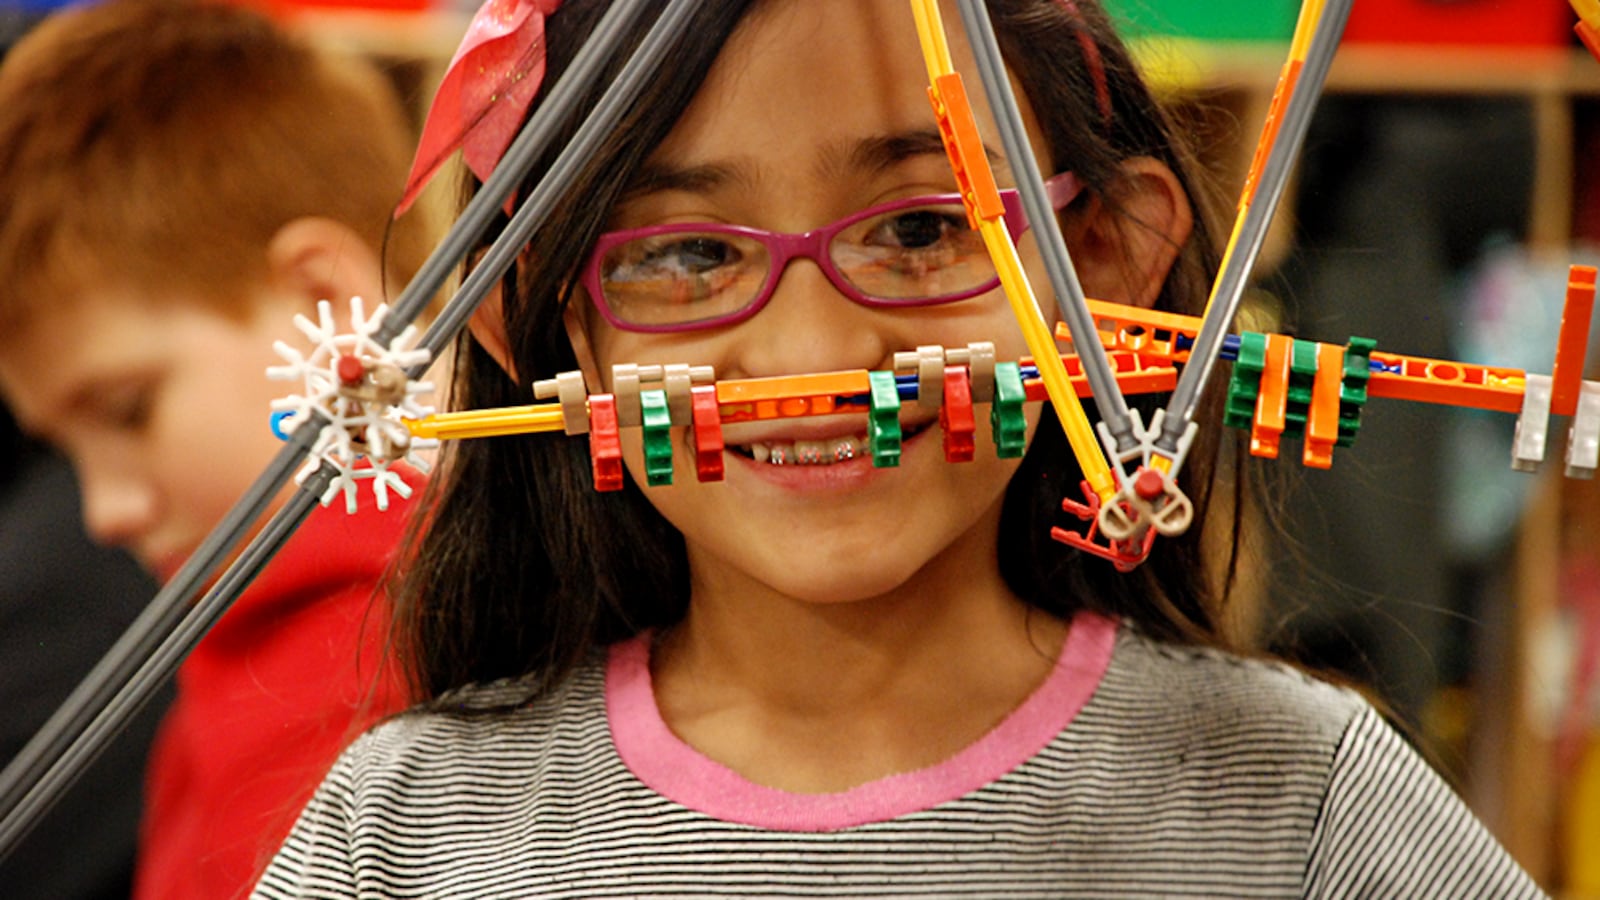 A student at Indian Peaks Elementary School works on a project in class.